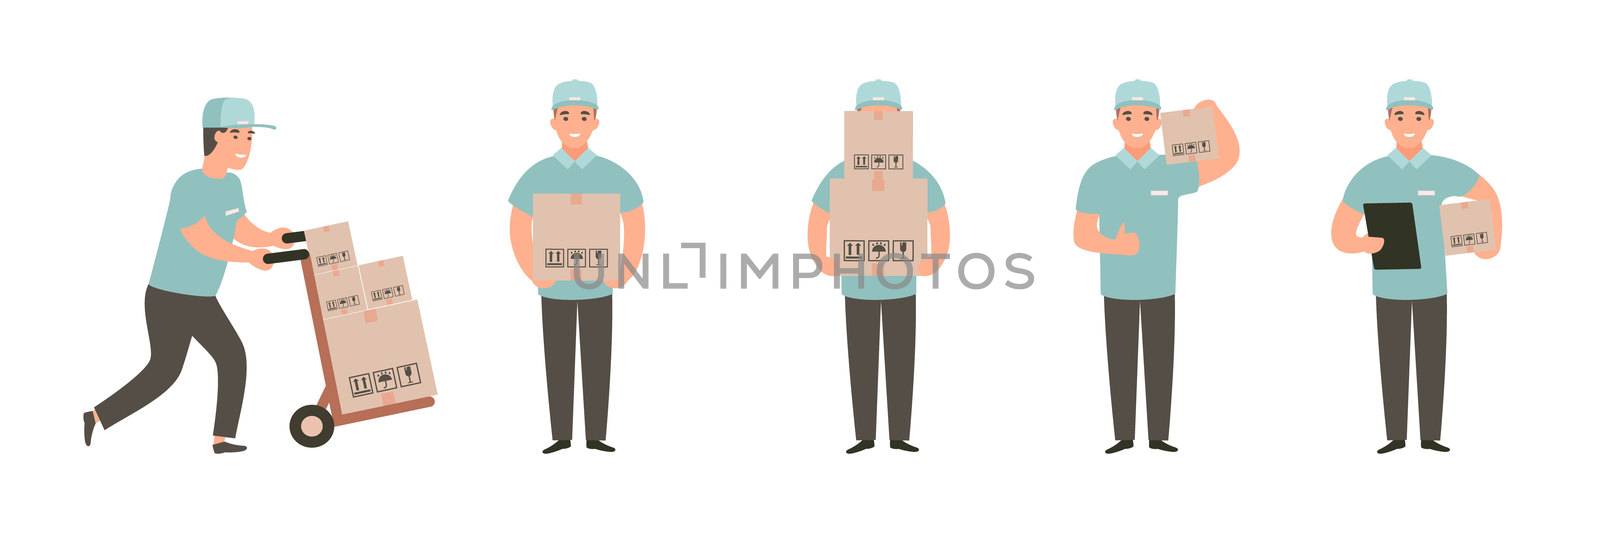 Man carries a cart with boxes. Delivery goods with dolly by hand. Delivery guy pushing a hand truck with purchases. Cartoon flat character design set